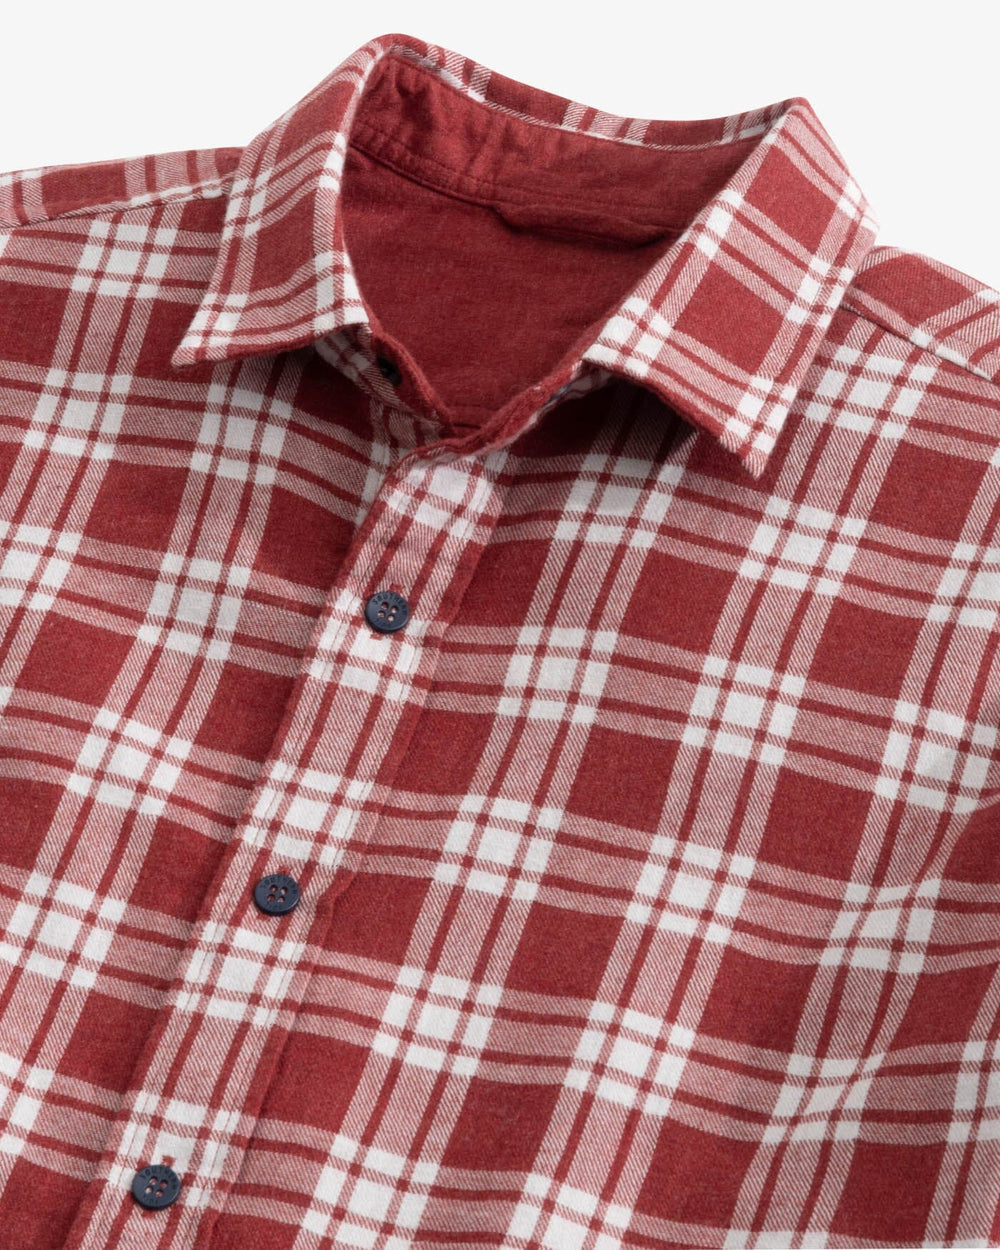 The detail view of the Southern Tide Heather Melbourne Reversible Plaid Sport Shirt by Southern Tide - Heather Tuscany Red